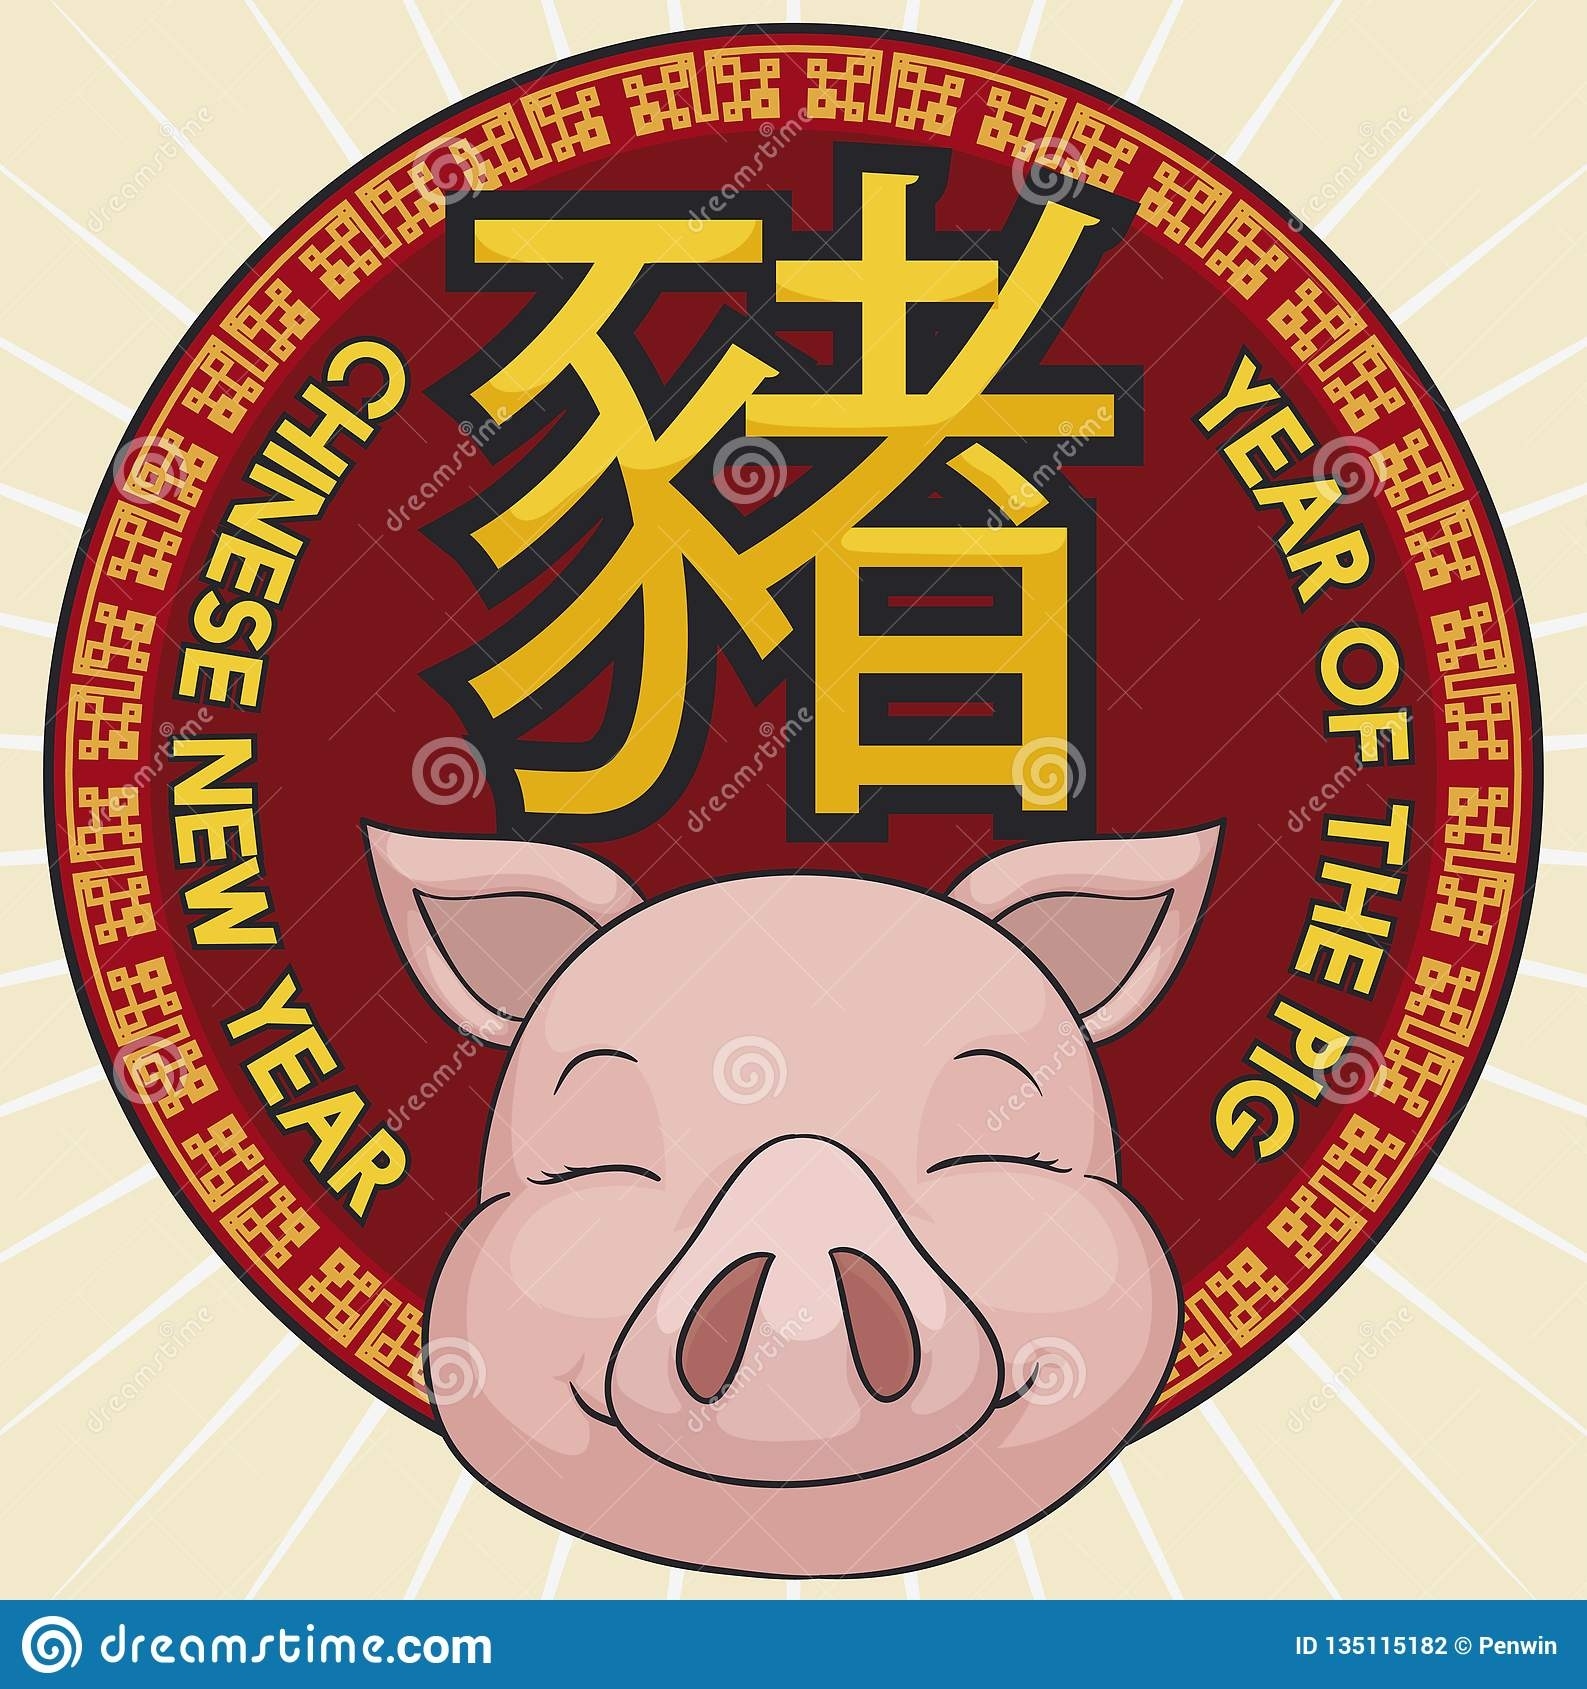 Round Button With Happy Pig For Chinese New Year Celebration Chinese Zodiac Calendar For Chrome Calendar